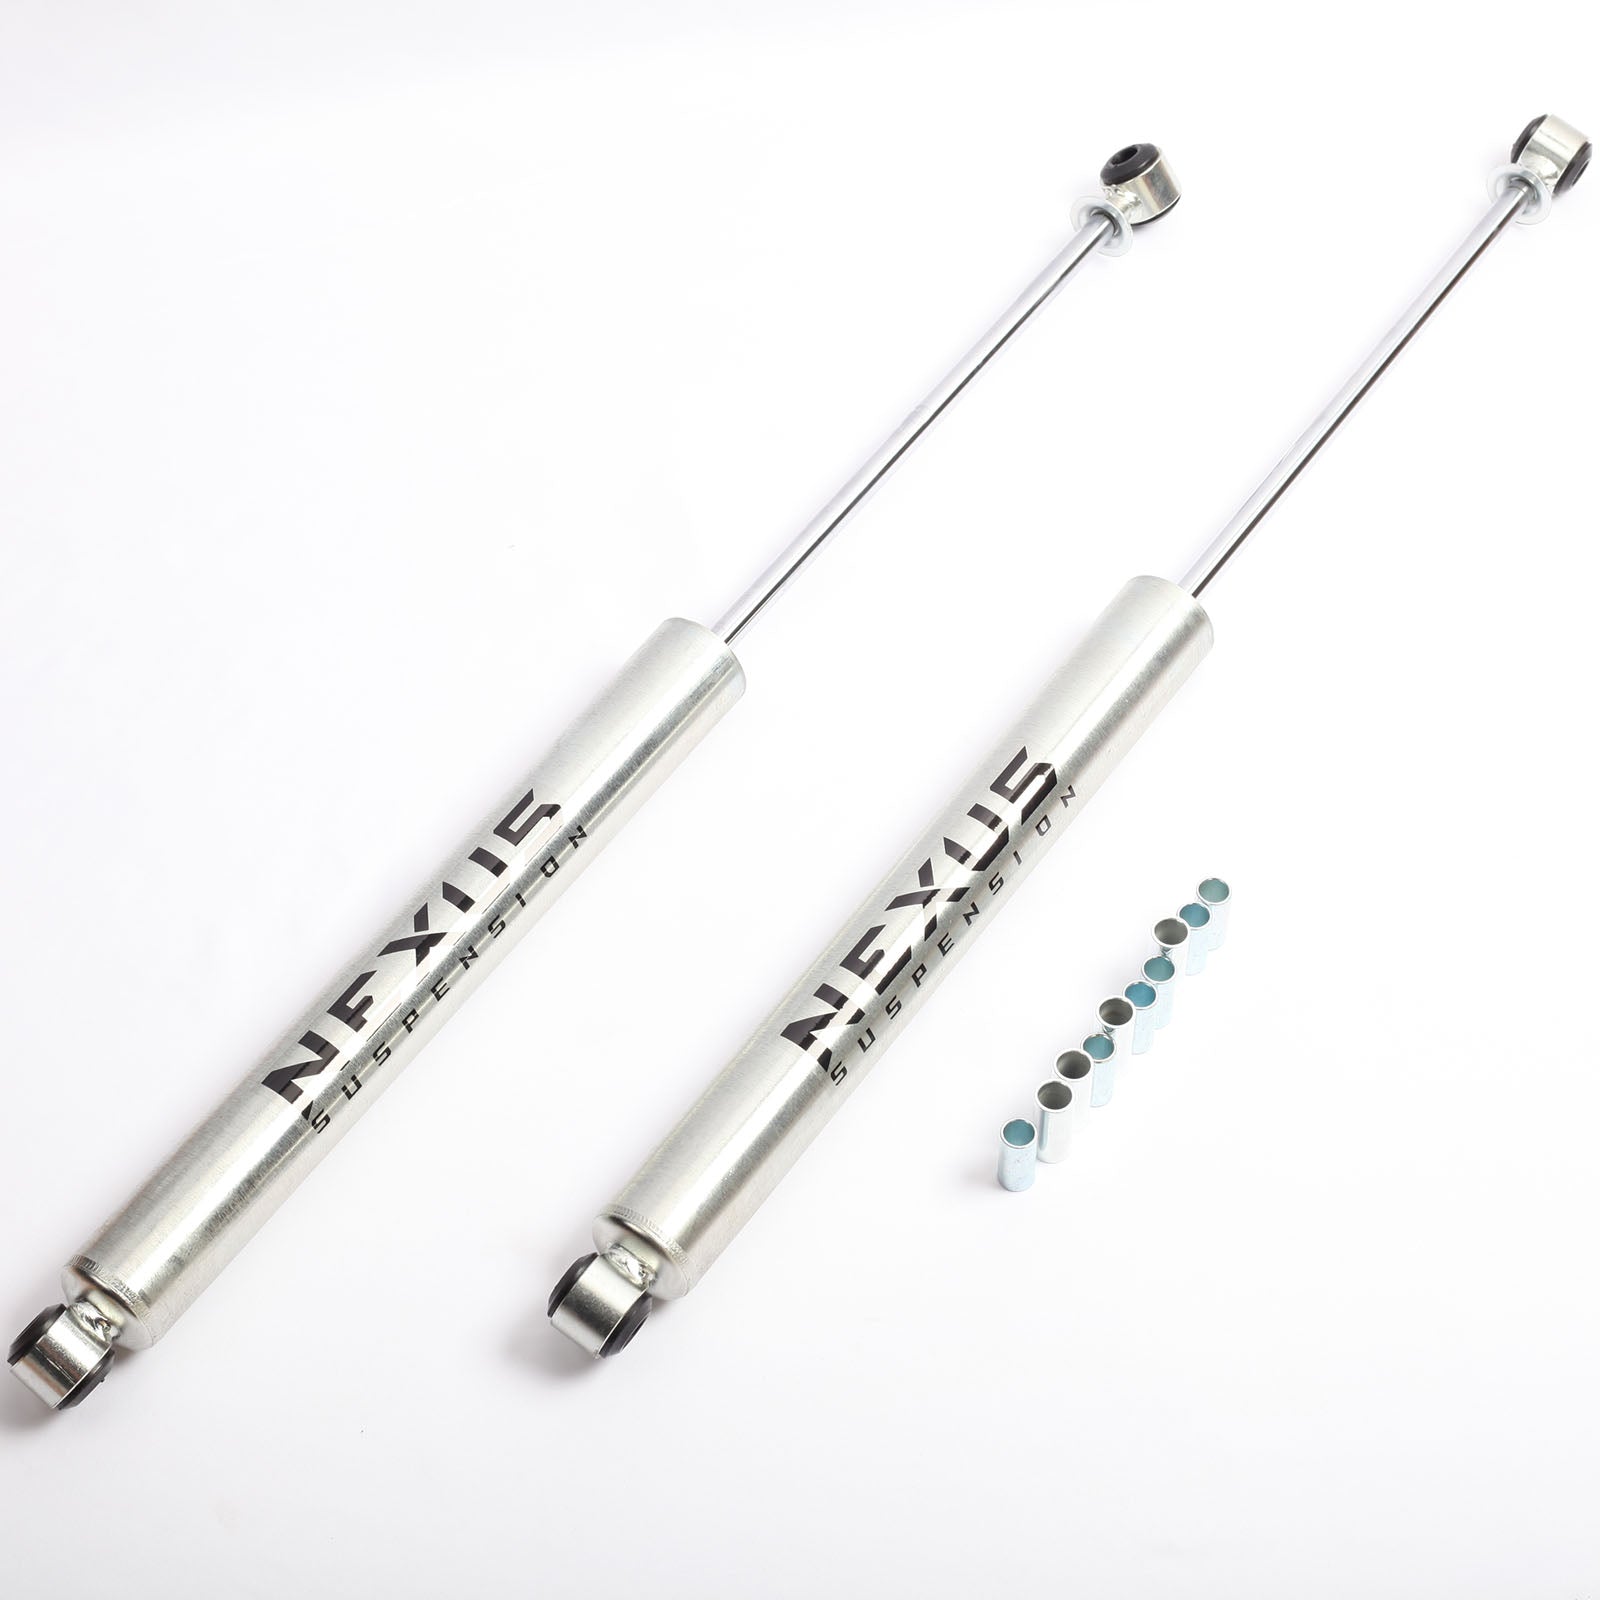 NEXUS SUSPENSION 2-4 Inch Lift Rear Shock Absorber for Ford F-250/F-350 1999-2004,Zinc Plated Coating,Pair Pack